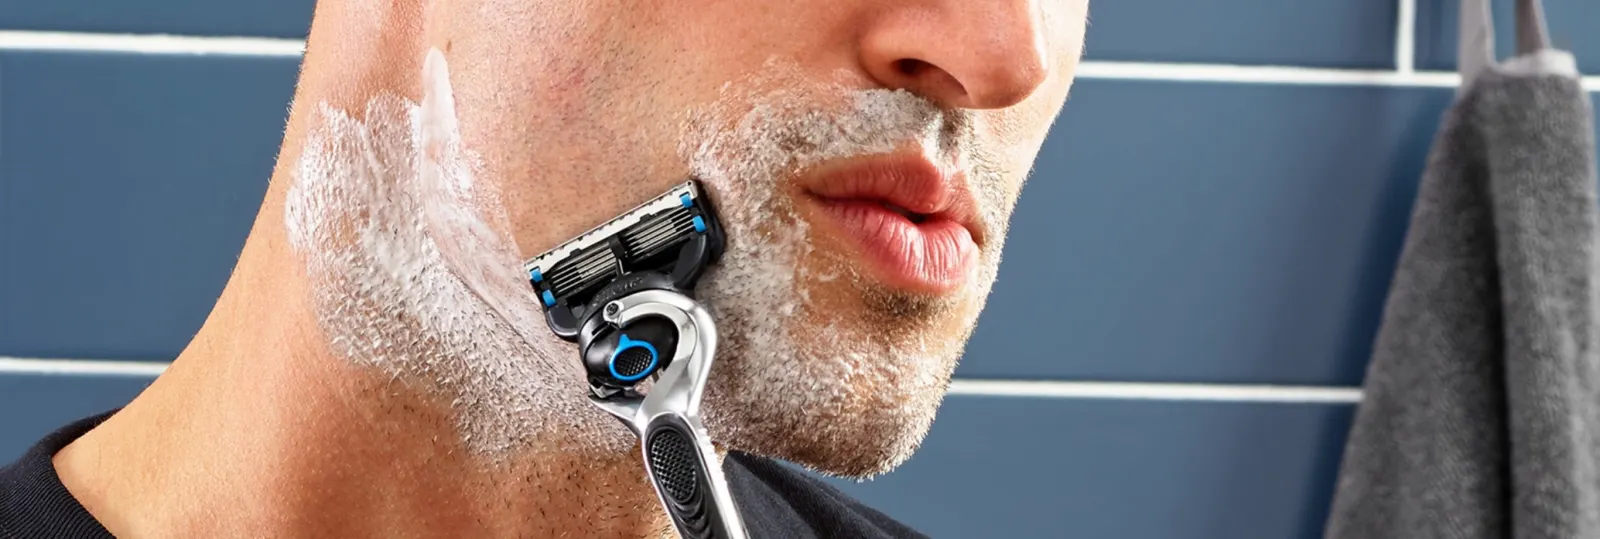 Gillette - Grooming and Getting Rid of Facial Hair